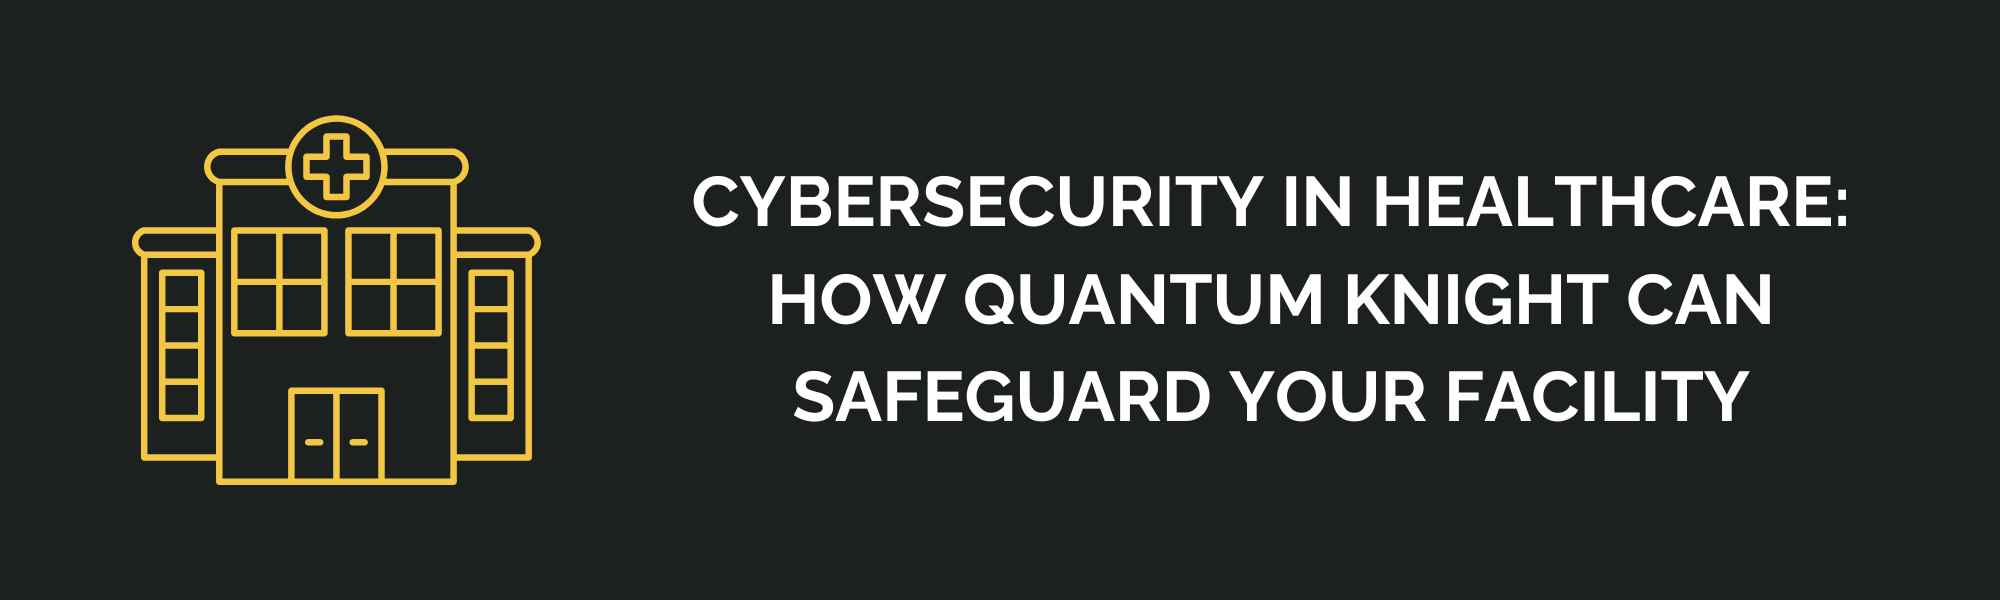 Cybersecurity in Healthcare: How Quantum Knight Can Safeguard Your Facility